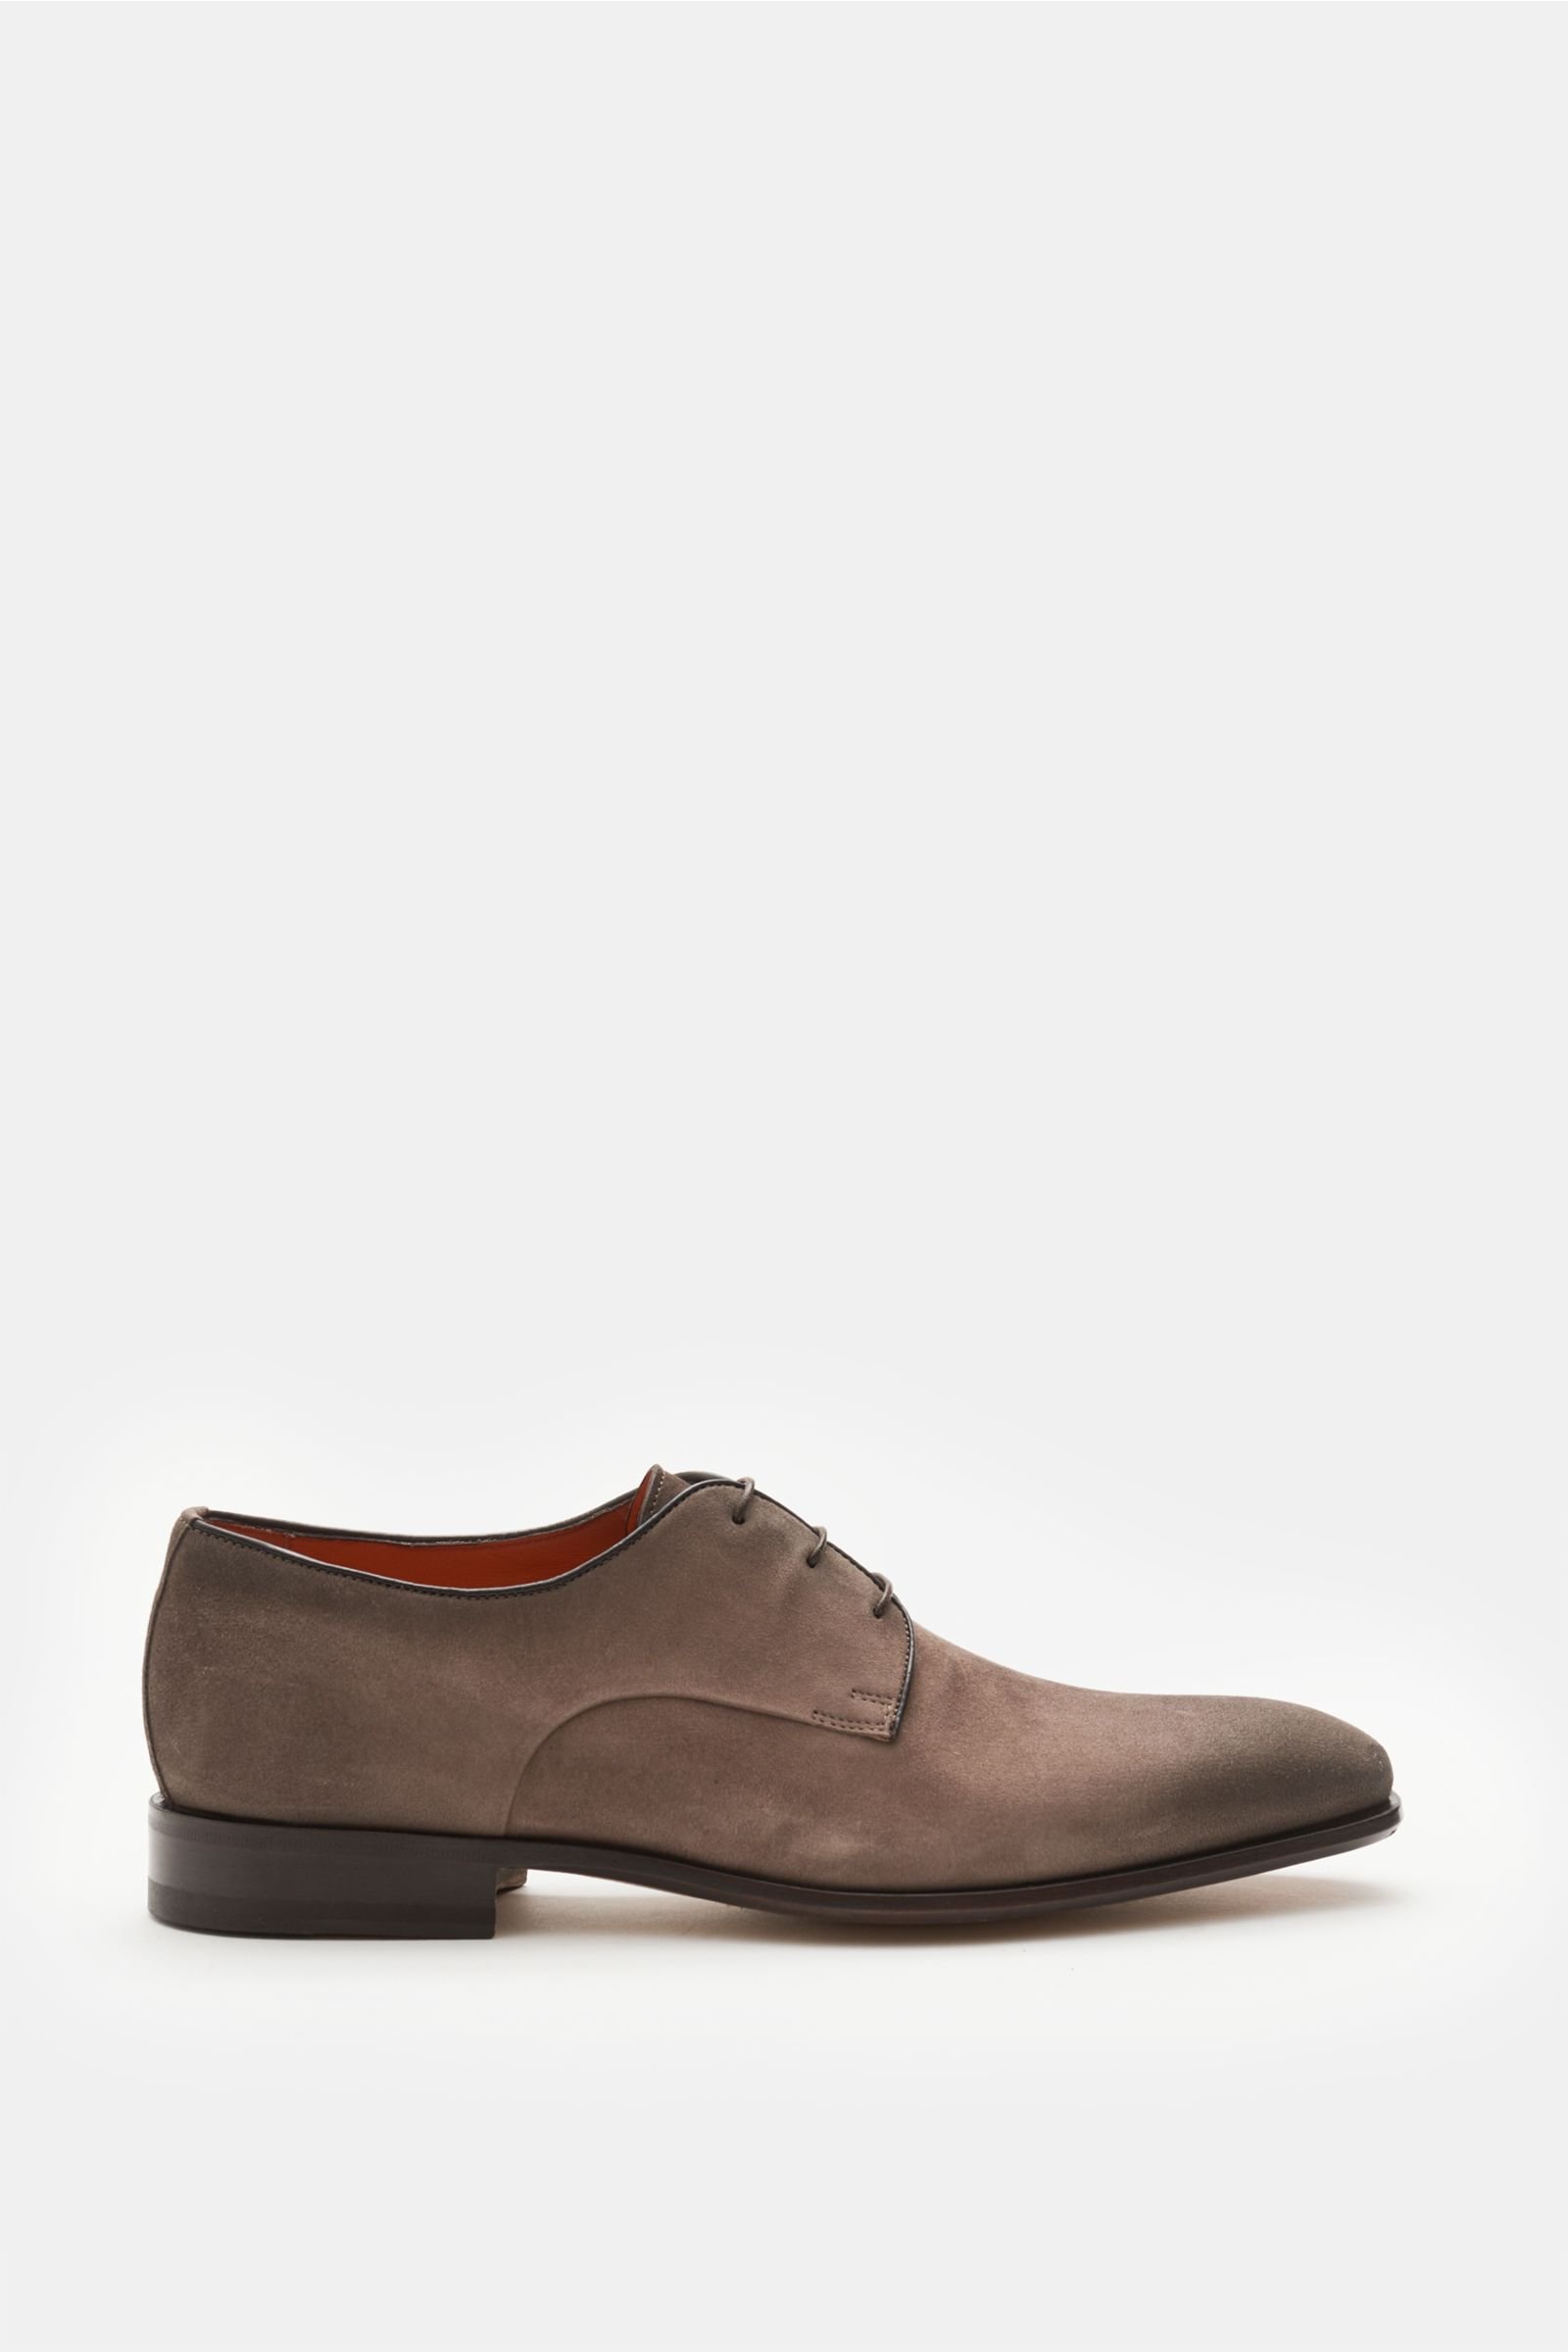 Derby shoes grey-brown